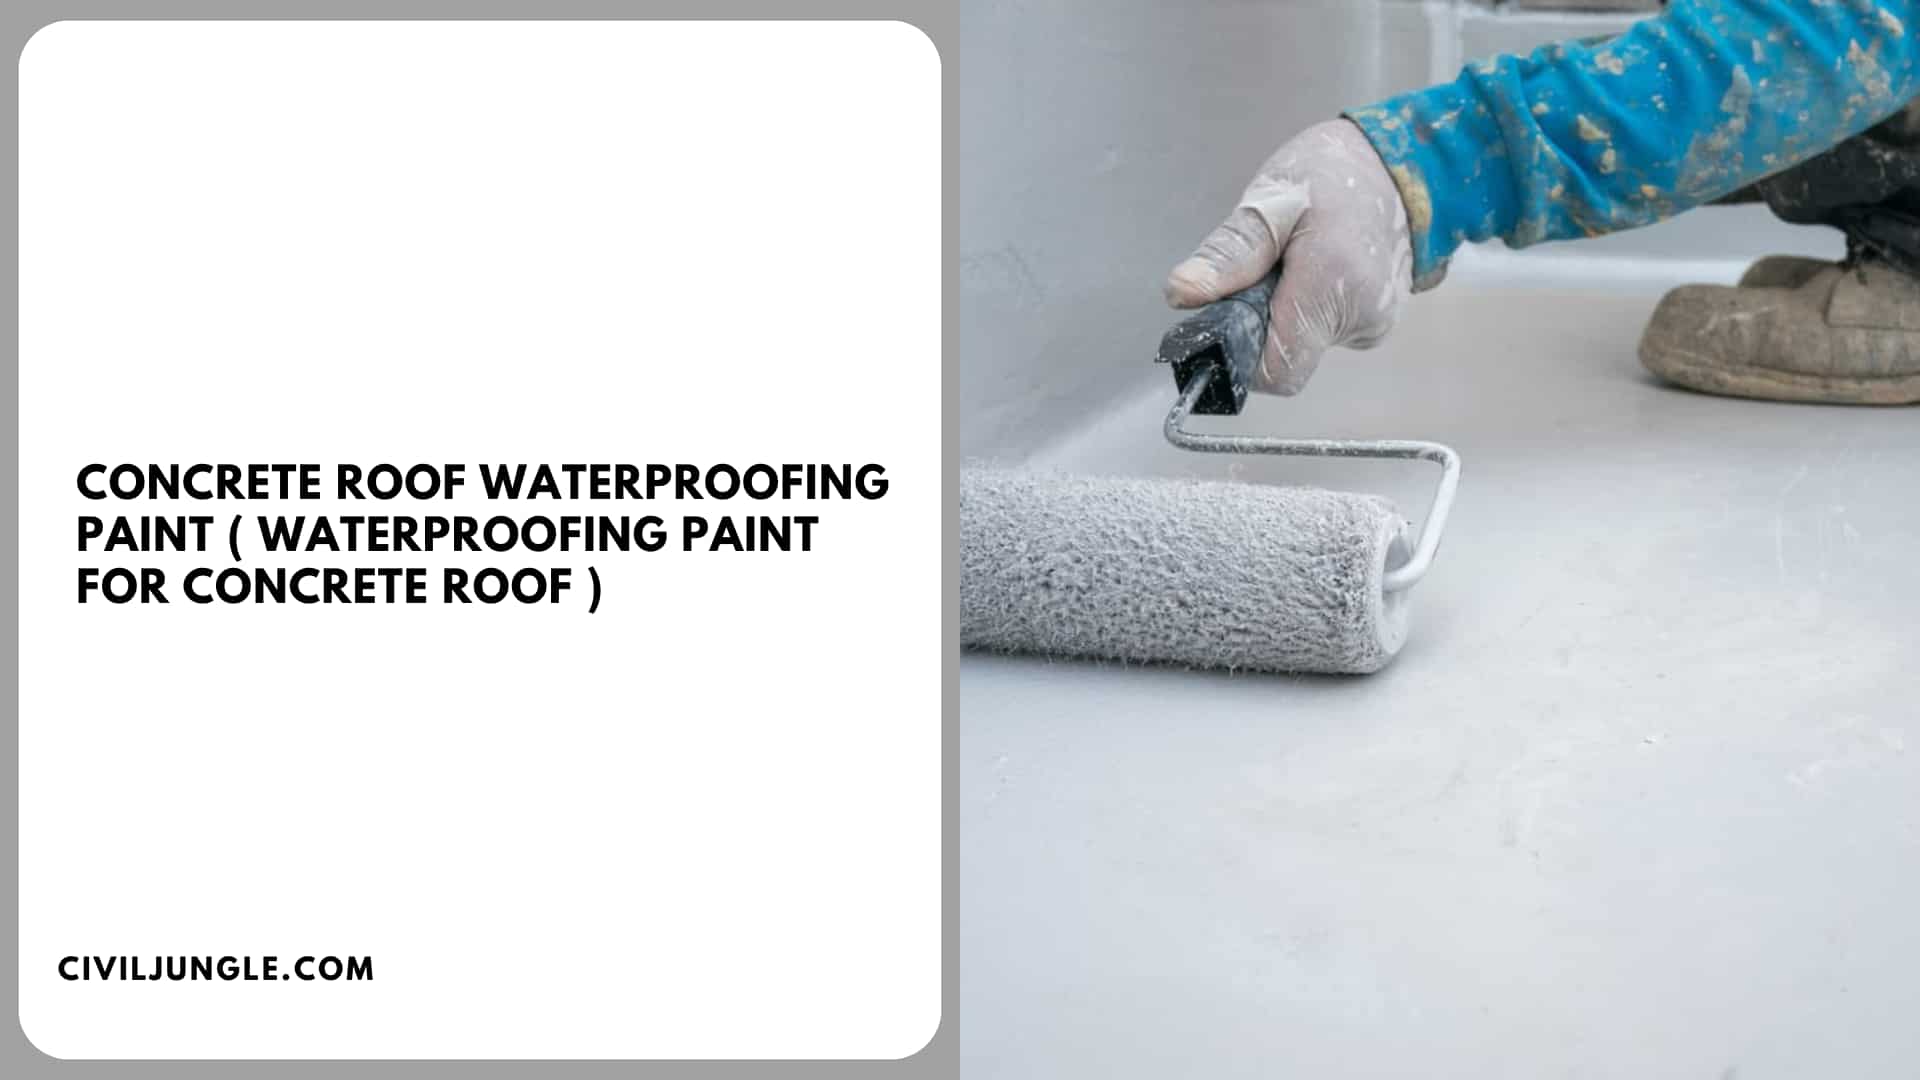 Concrete Roof Waterproofing Paint ( Waterproofing Paint for Concrete Roof )